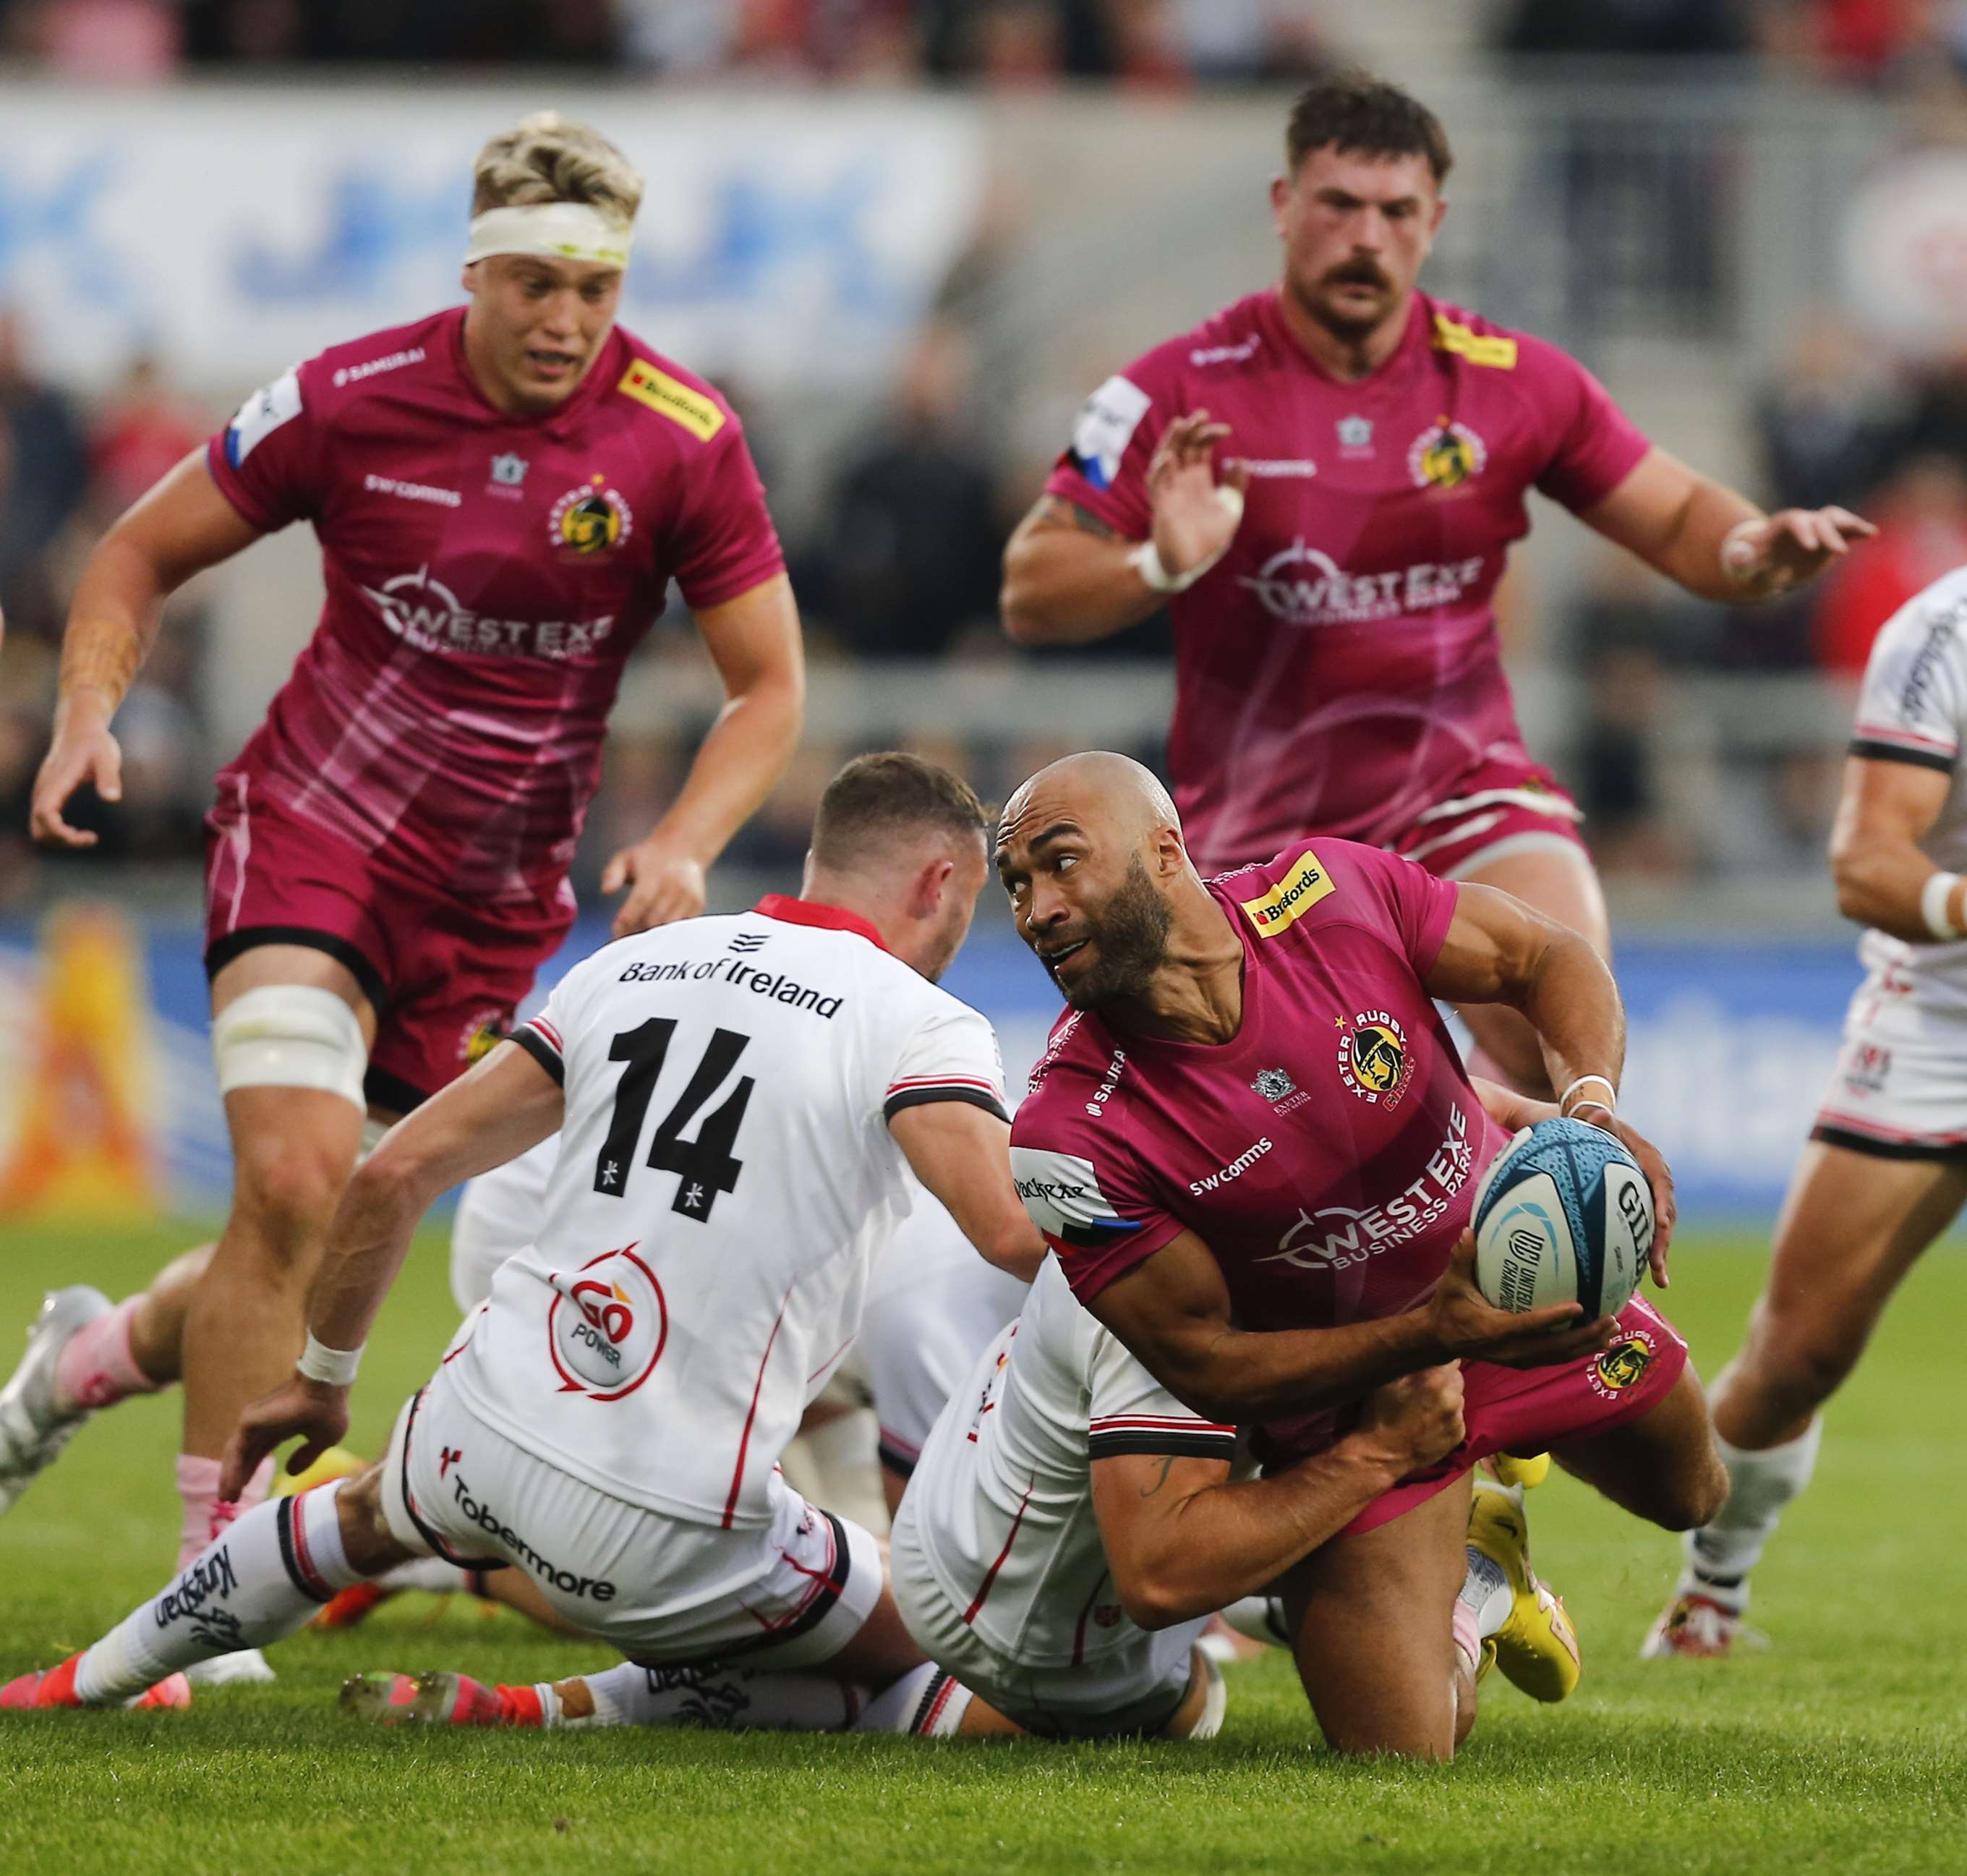 Ulster 31 Chiefs 12